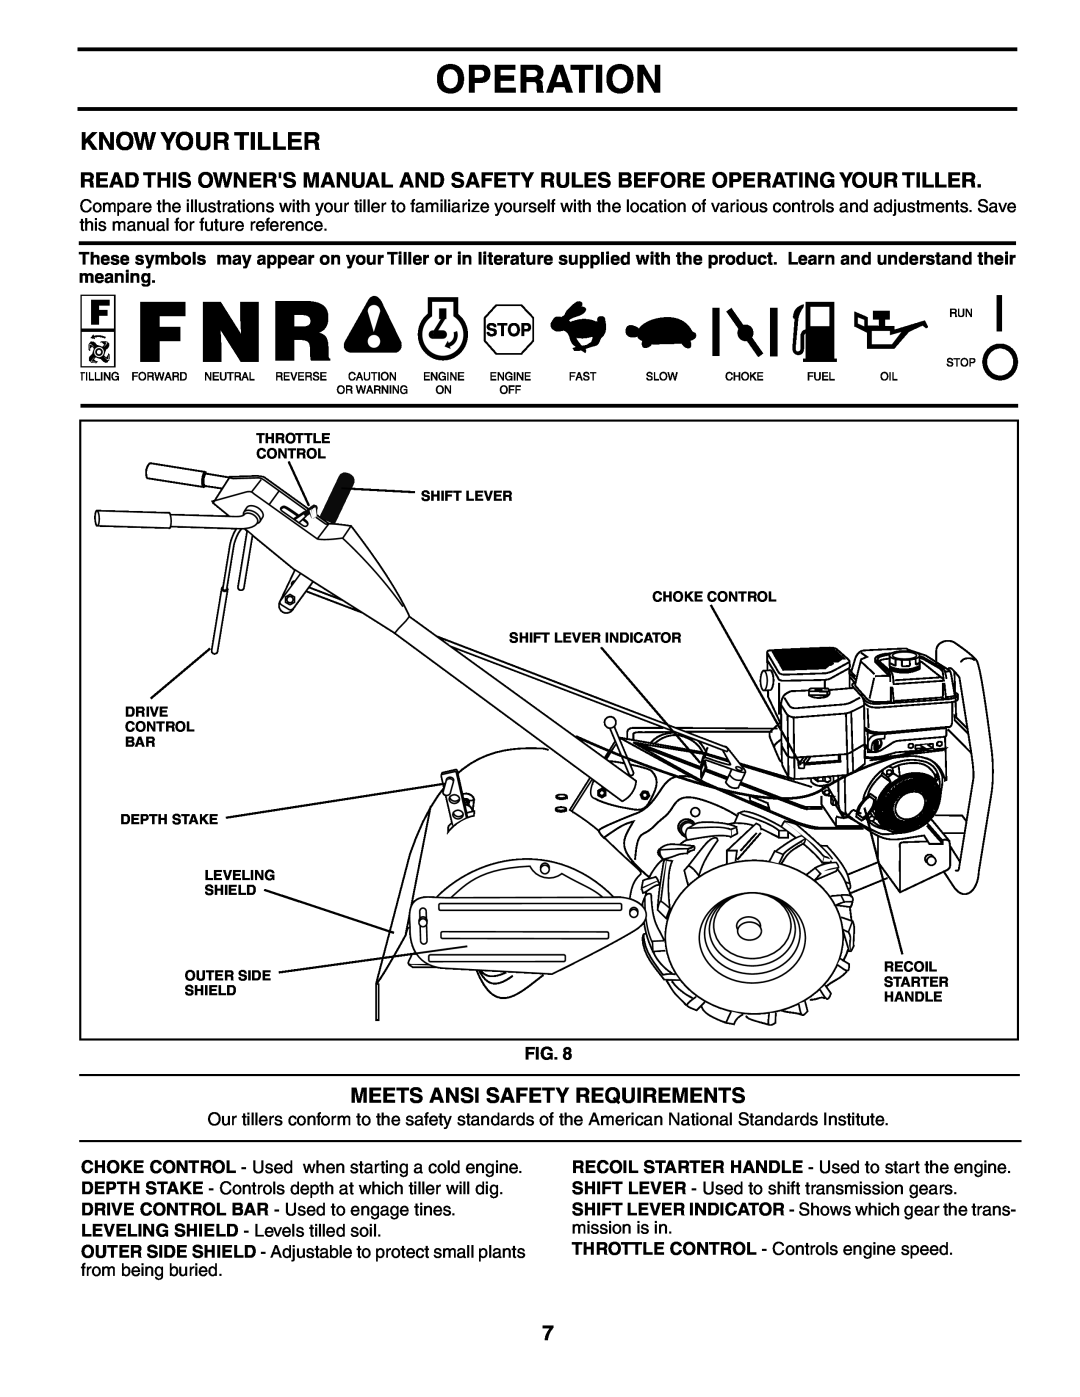 Poulan PRRT65 manual Operation, Know Your Tiller, Read This Owners Manual And Safety Rules Before Operating Your Tiller 